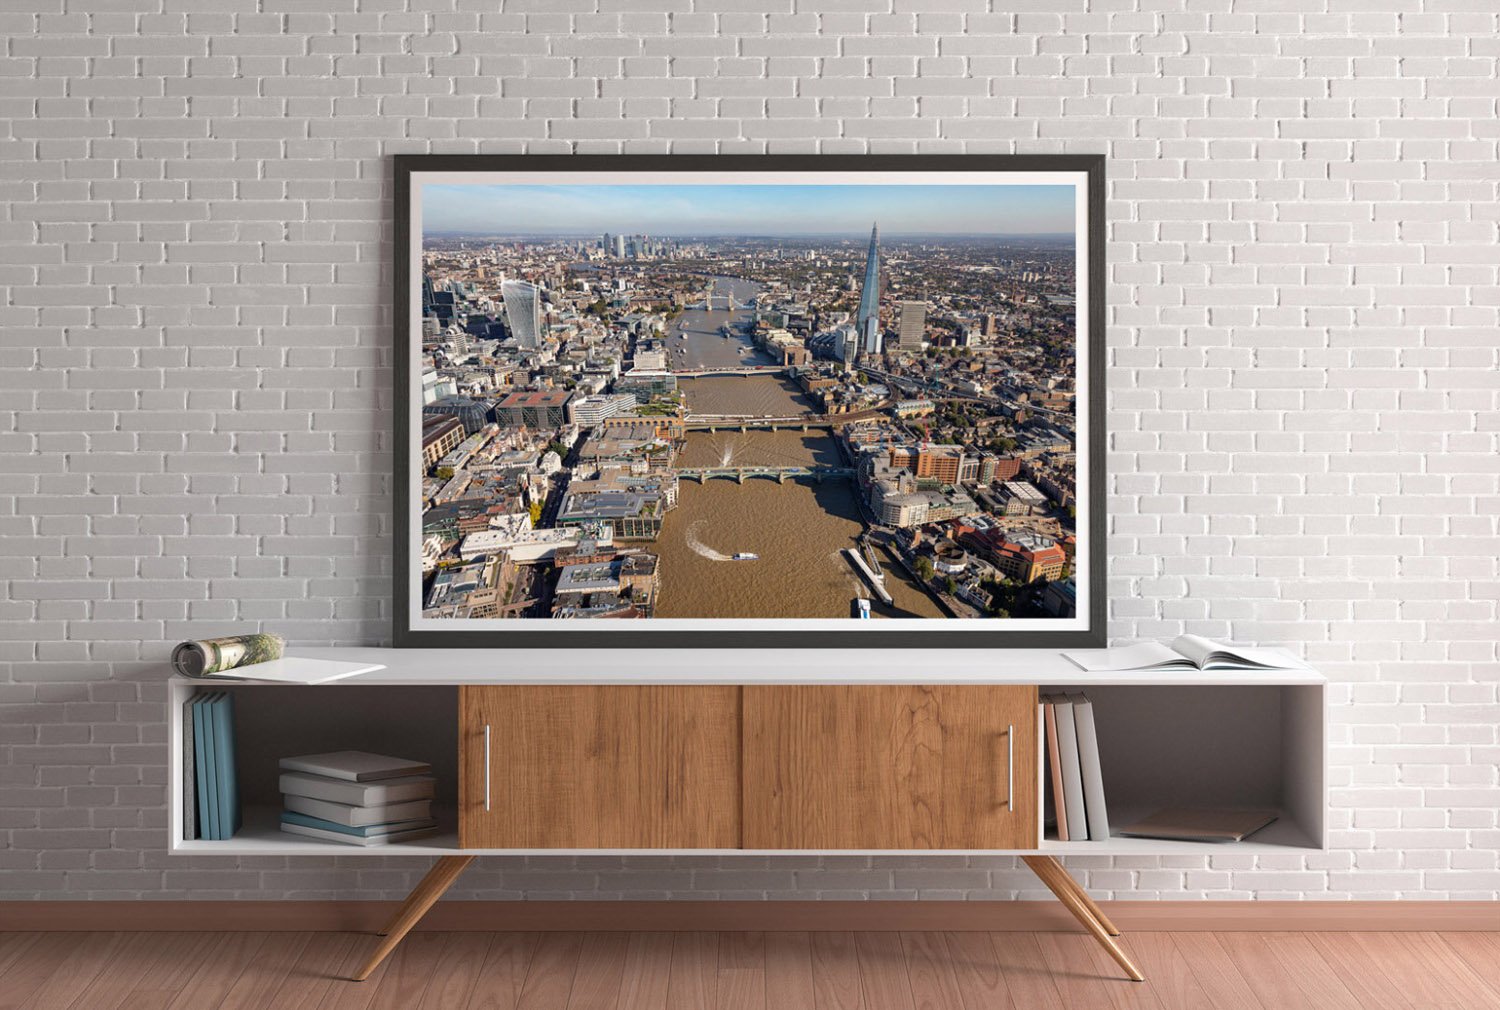  Poster of an Aerial views of London showing London skyline of the River Thames looking East 